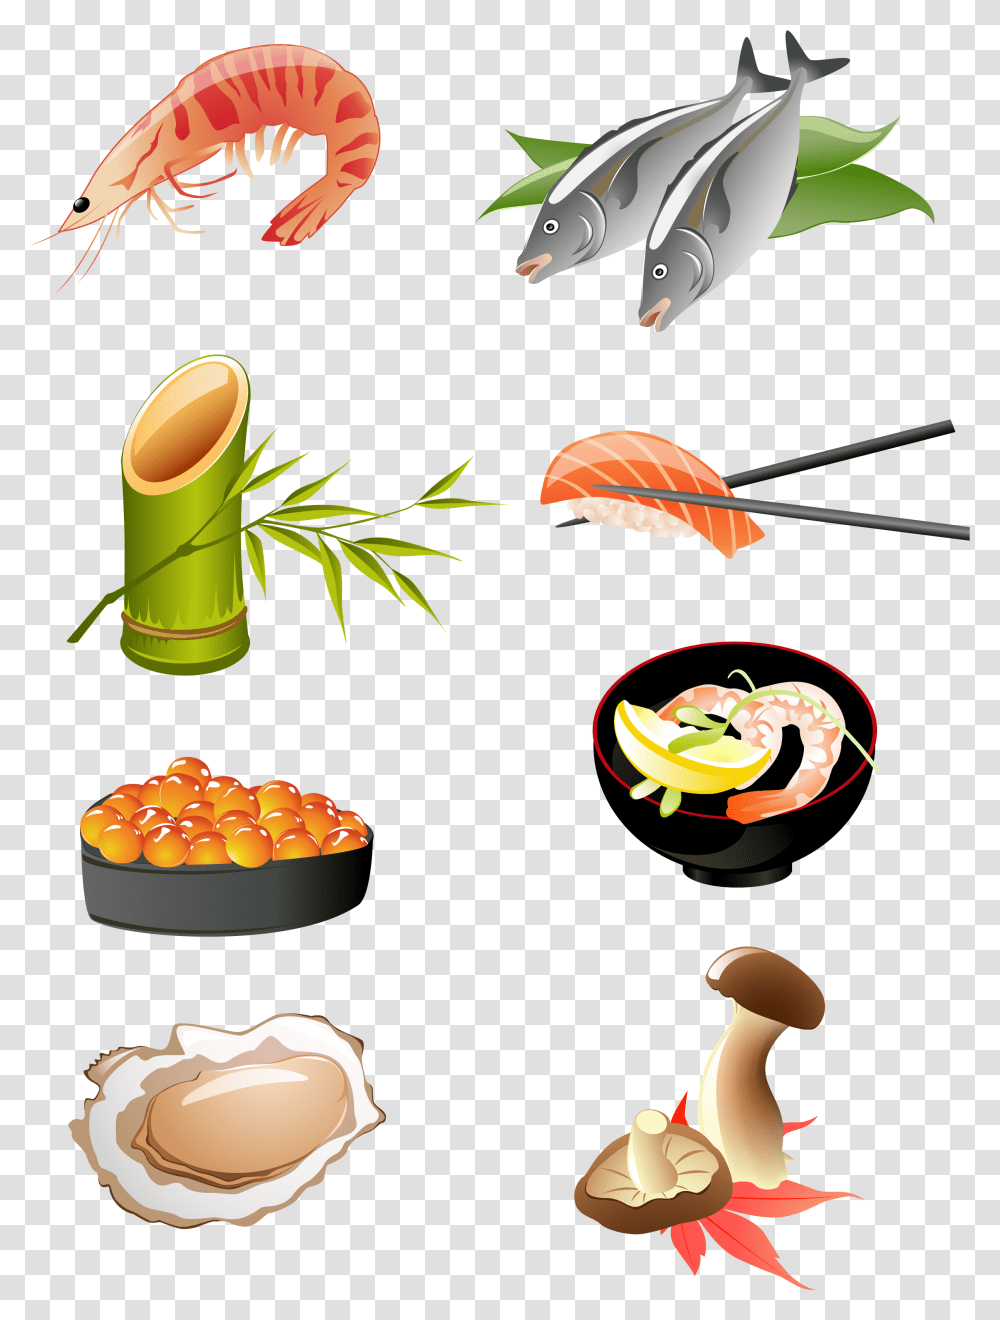 Seafood Clam Plateau De Fruits De Mer Crab Oyster Seafoods Vector Hd, Plant, Weapon, Weaponry Transparent Png